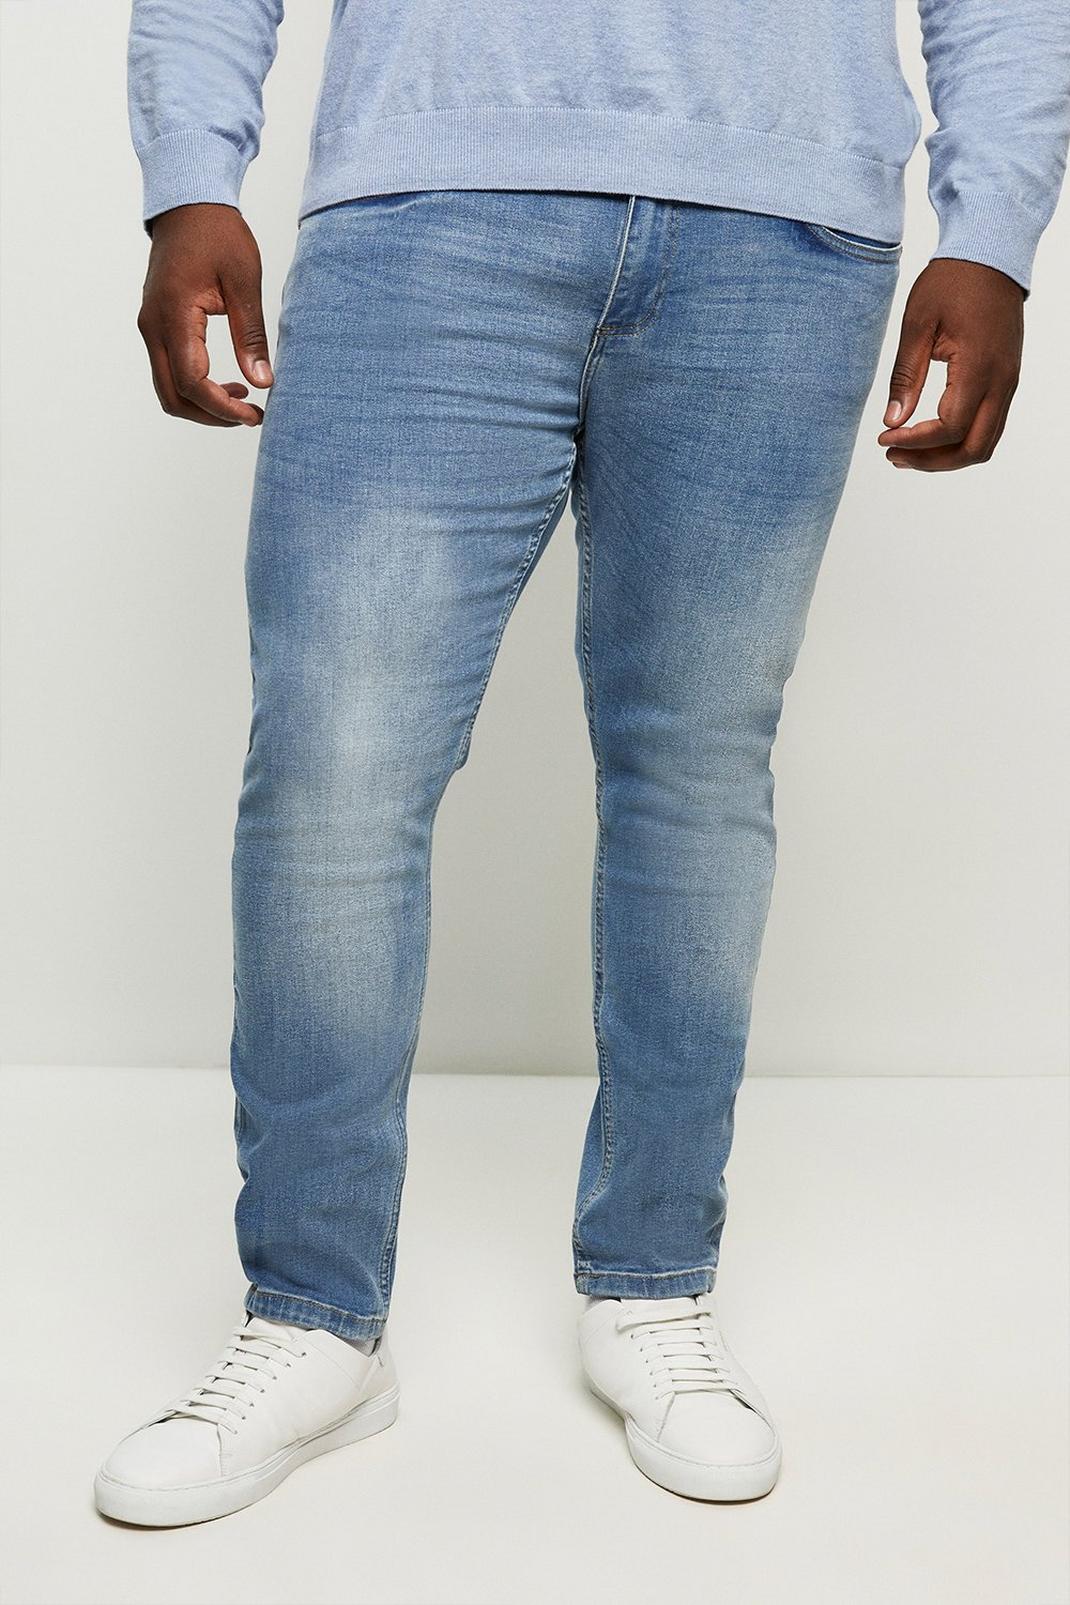 Plus And Tall Skinny Light Blue Jeans image number 1